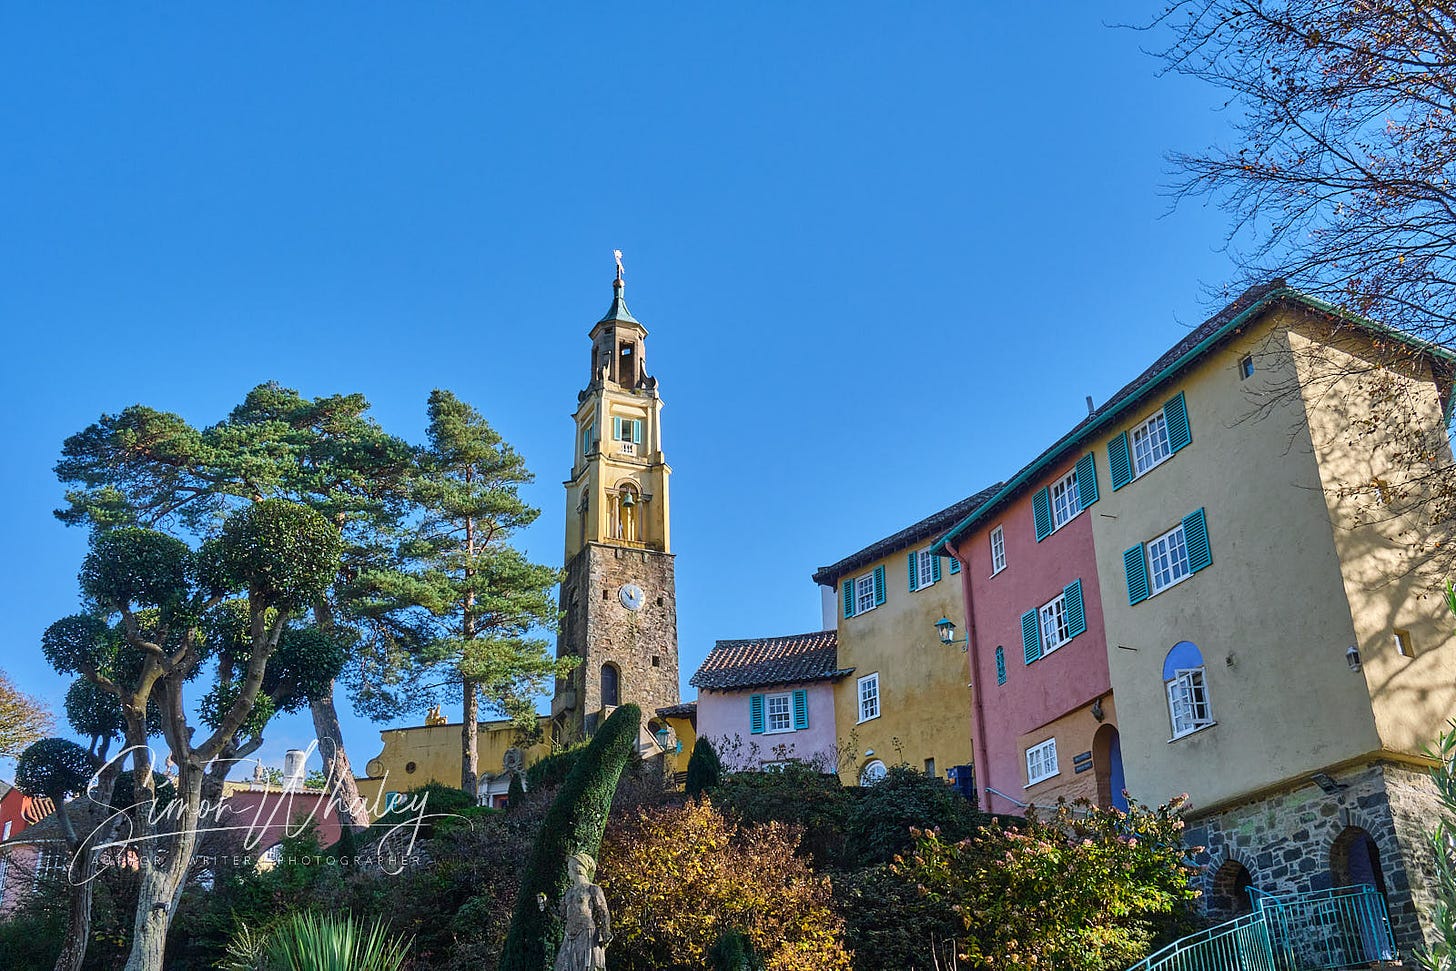 The tall, slender Bell Tower rises above rows of Italianate houses on the North Wales village of Portmeirion